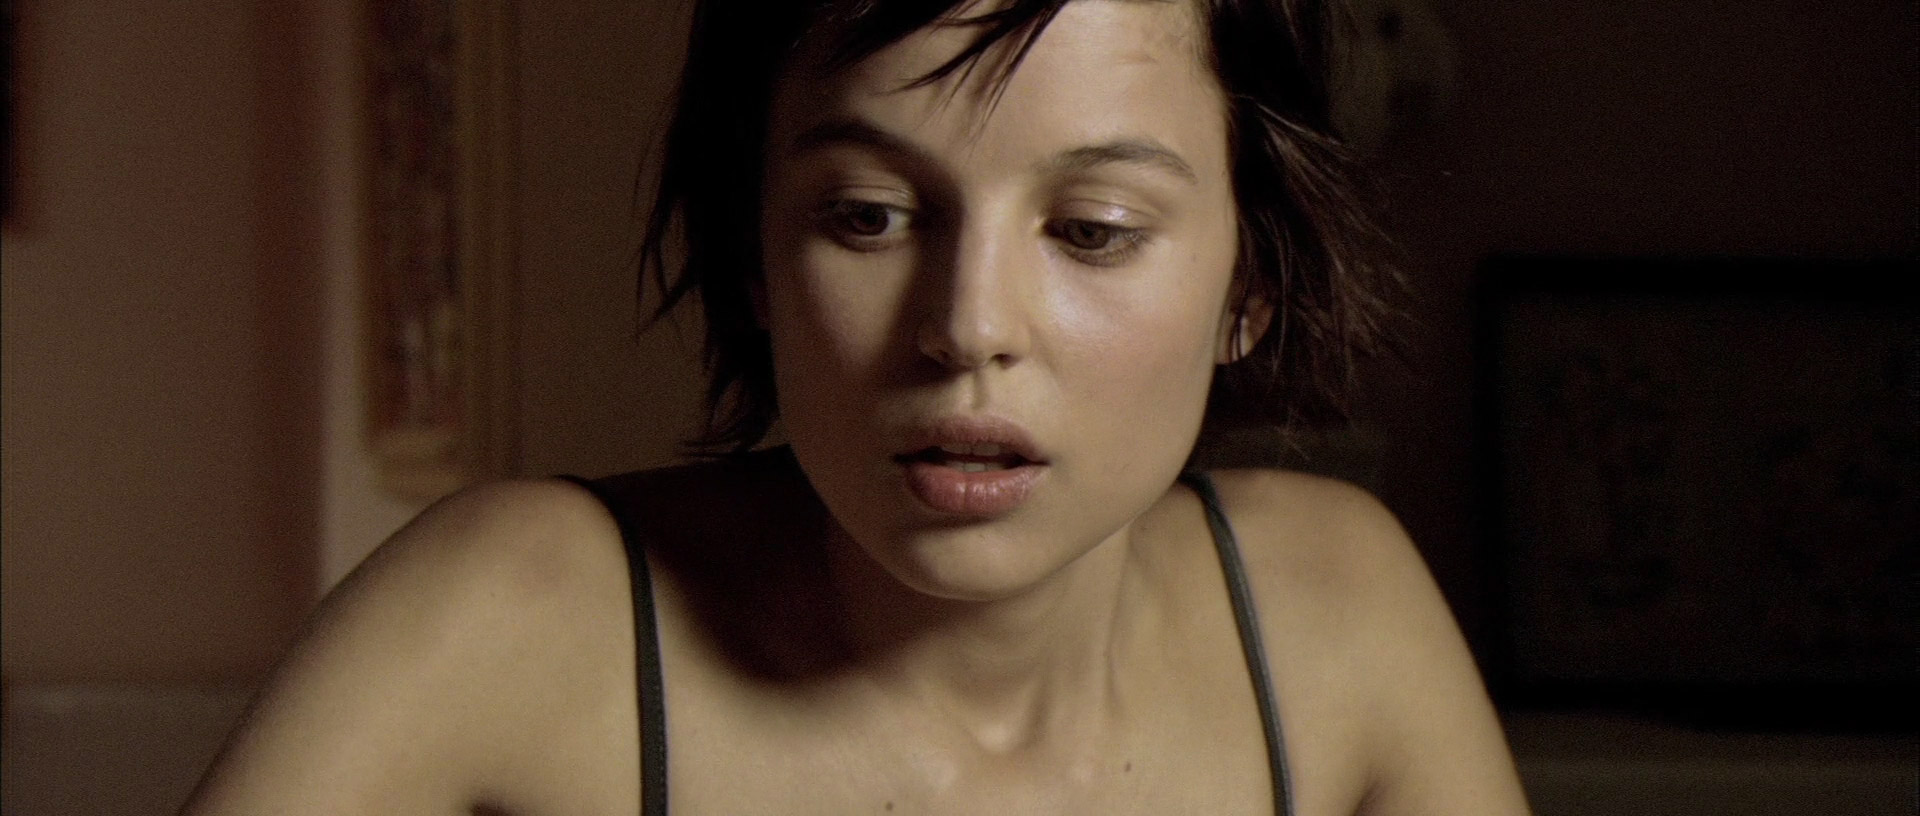 Elena Anaya in Sex and Lucia